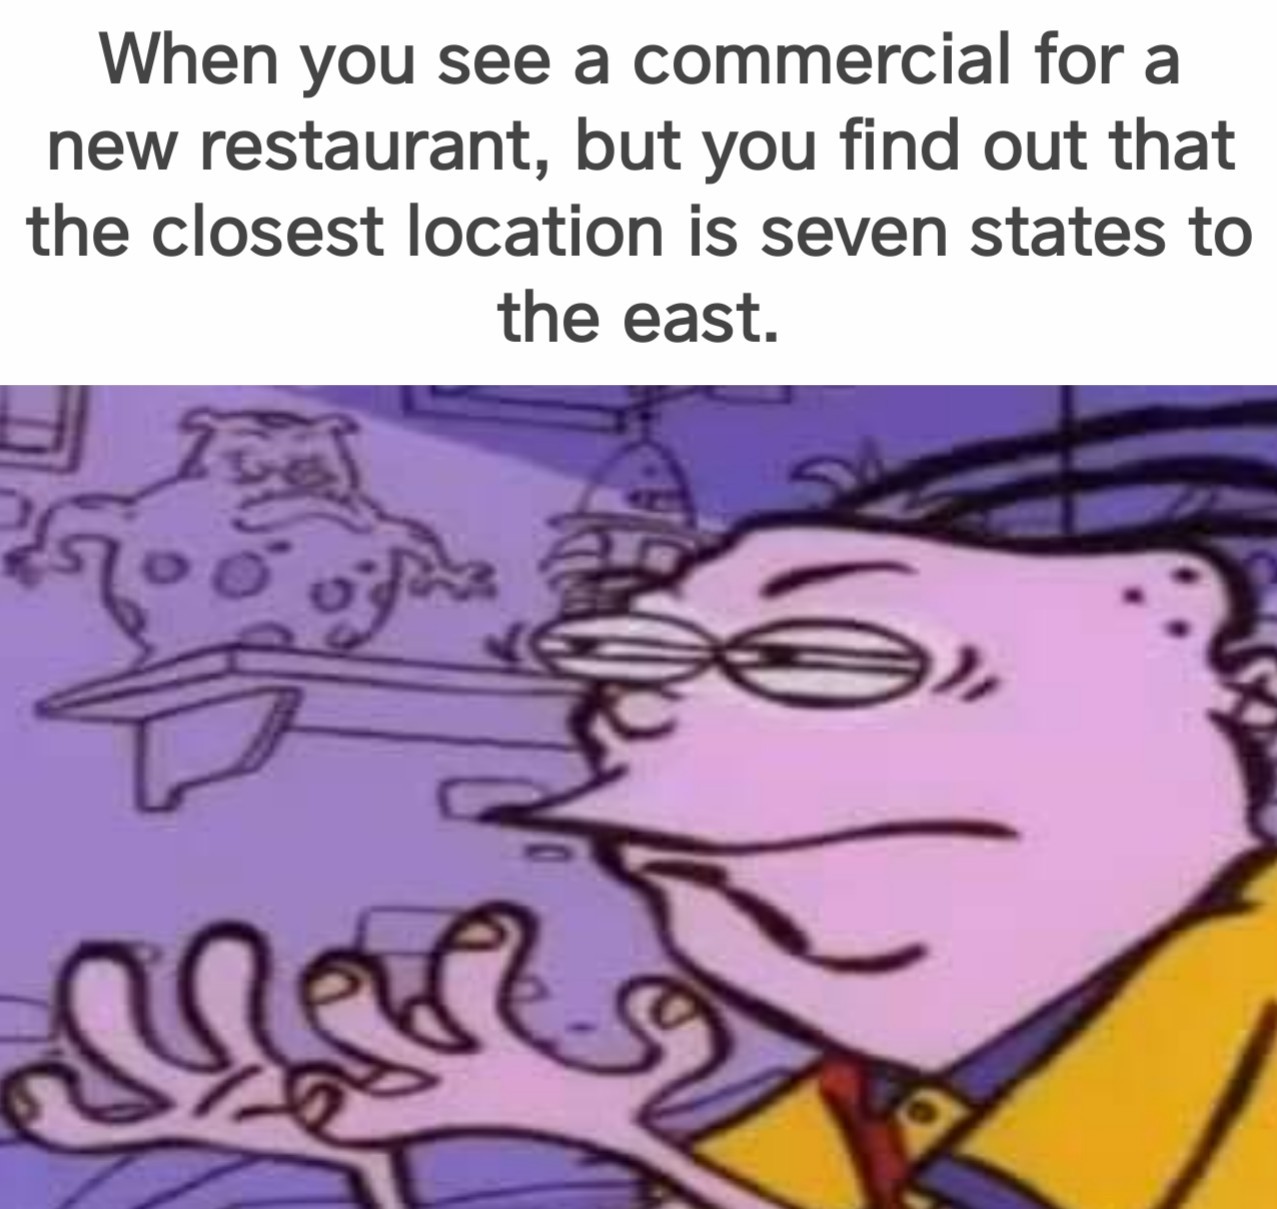 Why am I seeing the commercial if it's not local? - meme